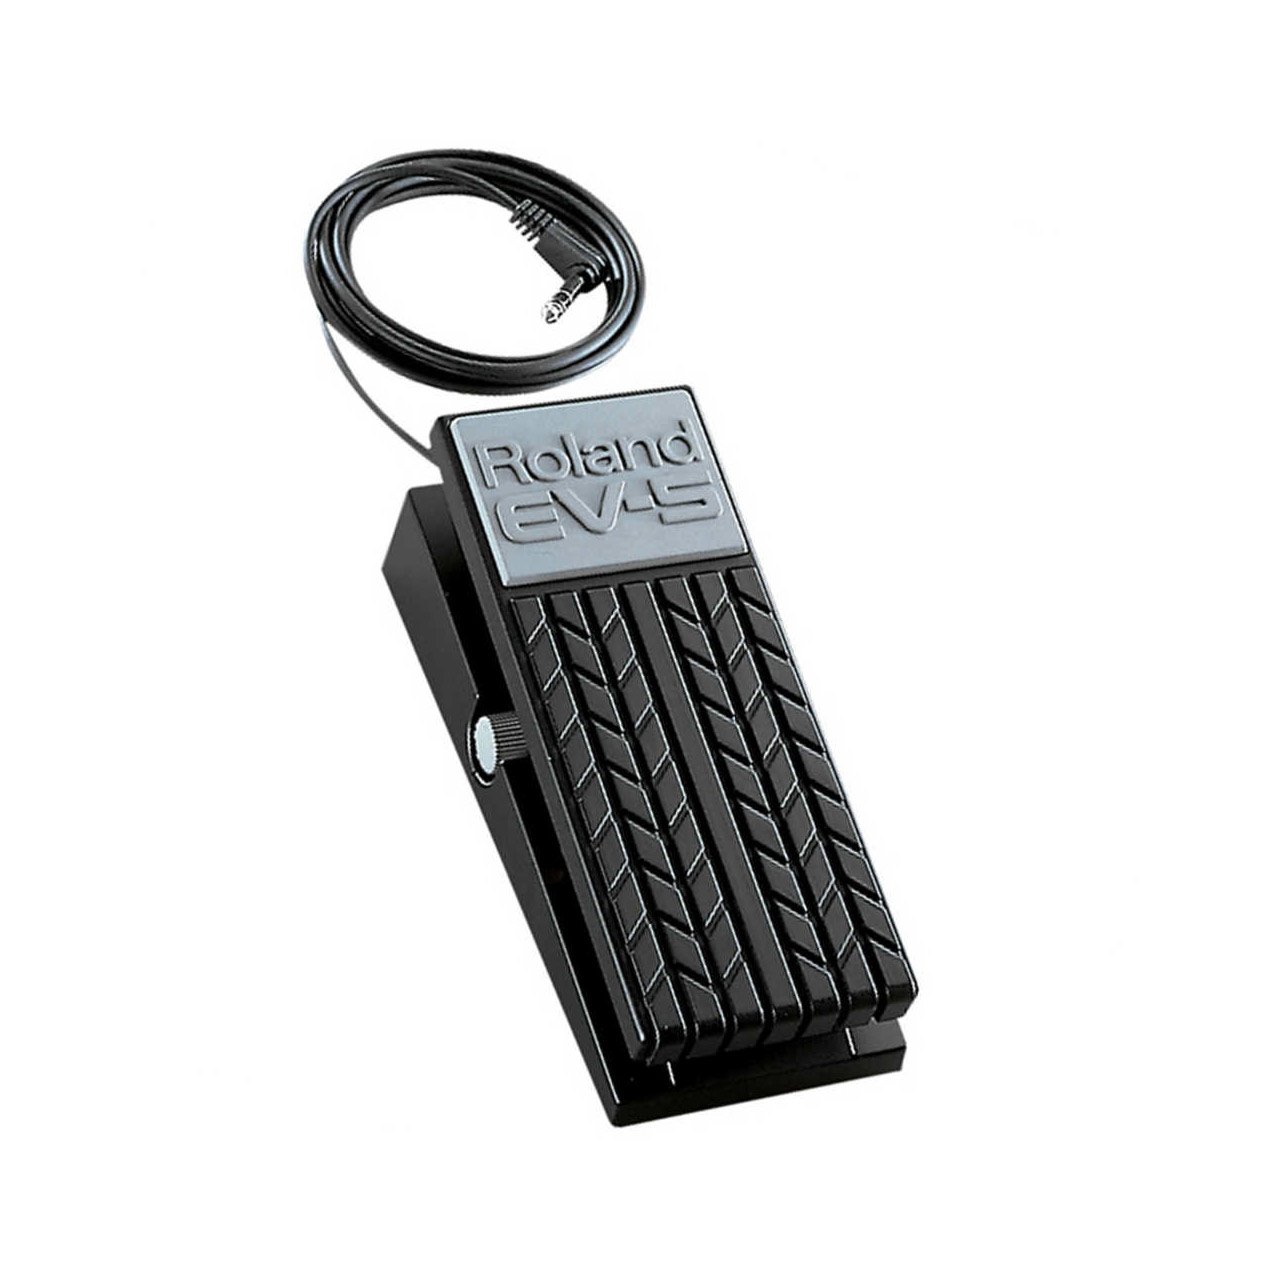 Keyboard Accessories - Roland EV-5 Expression Pedal